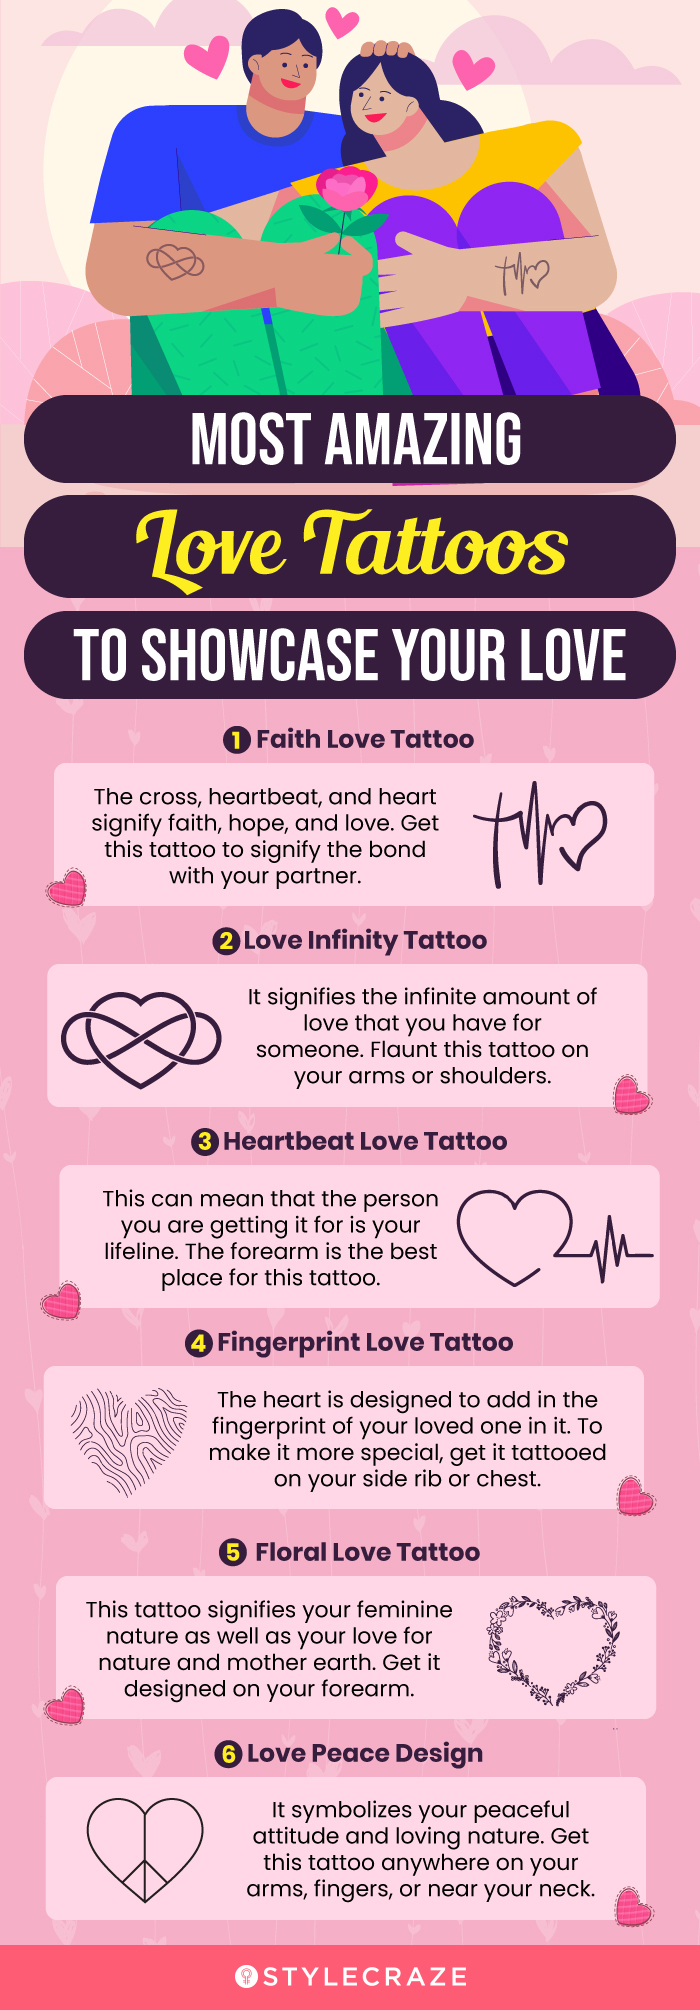 12 ways to show off your love for Brand New with tattoos